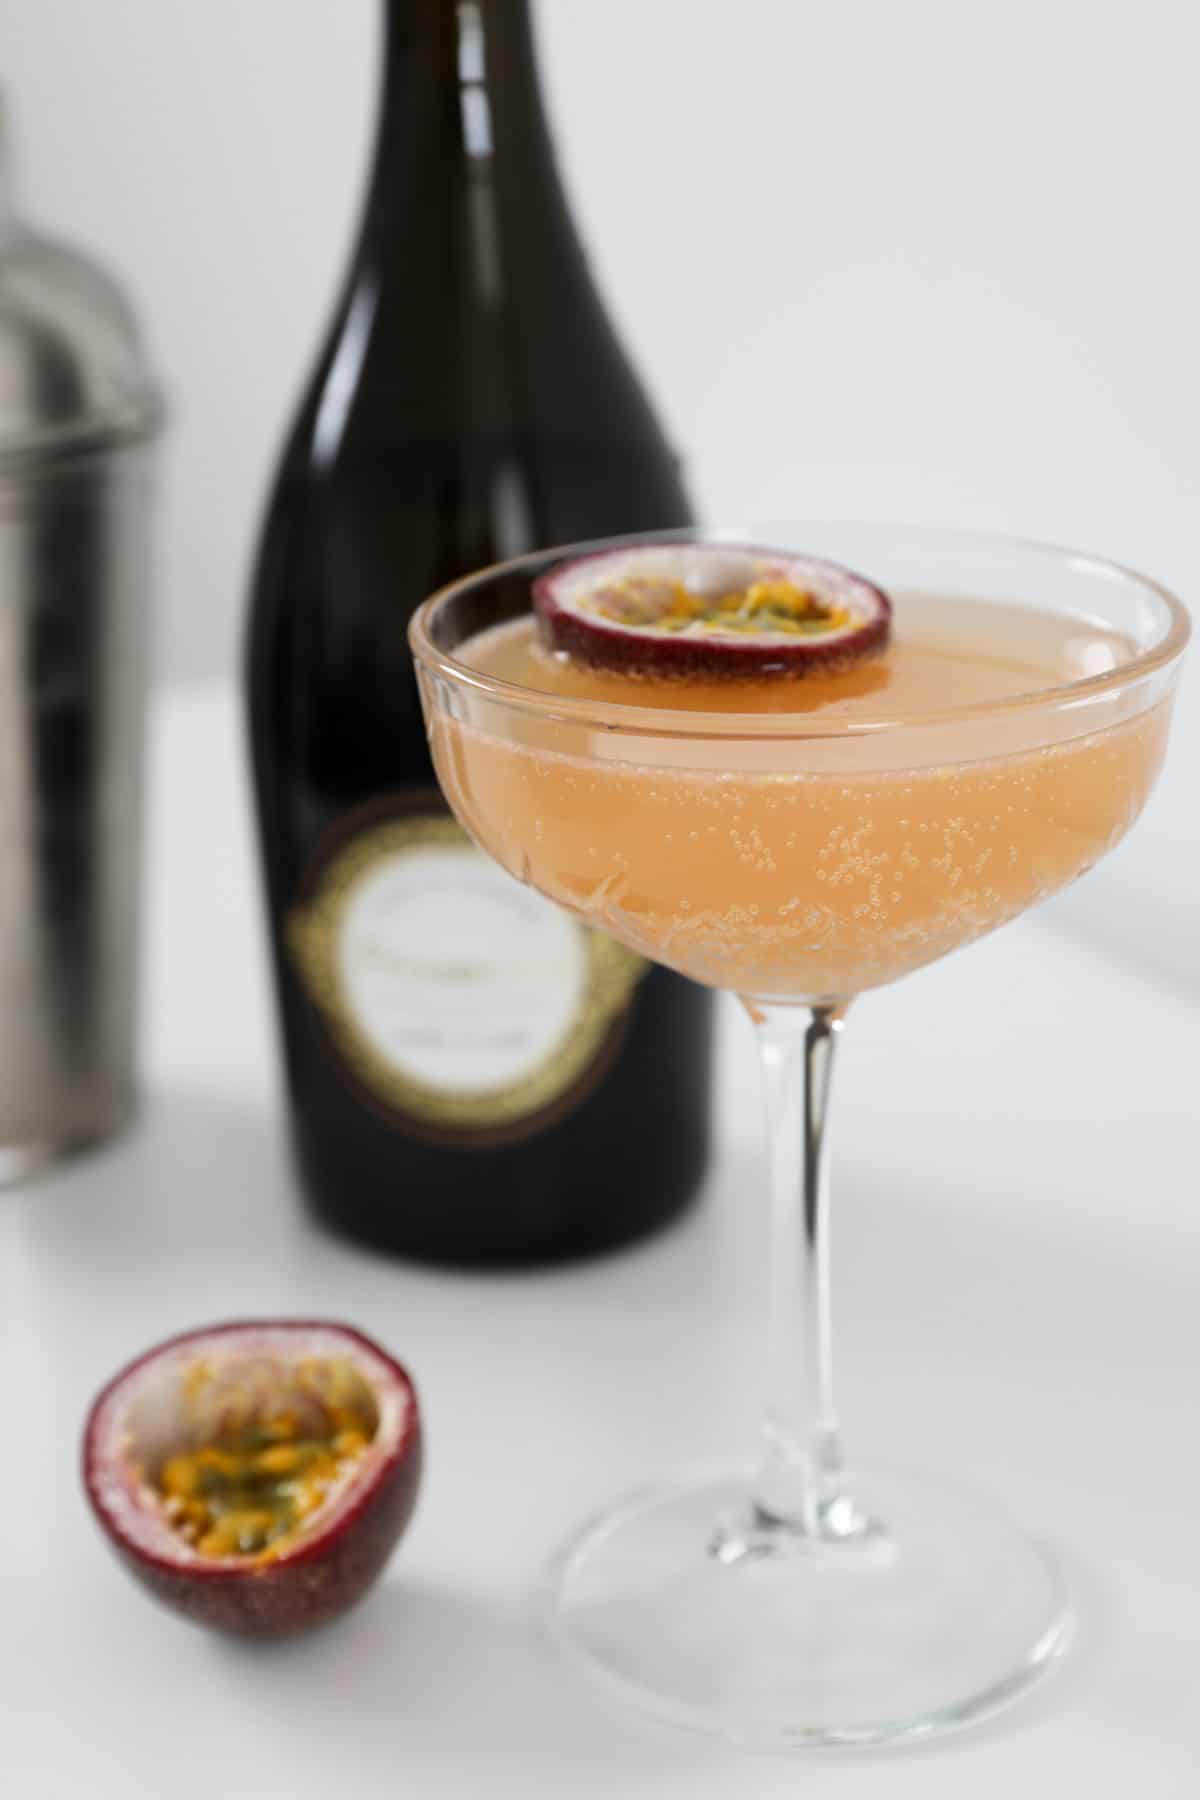 A passionfruit cocktail garnished with fresh passionfruit.